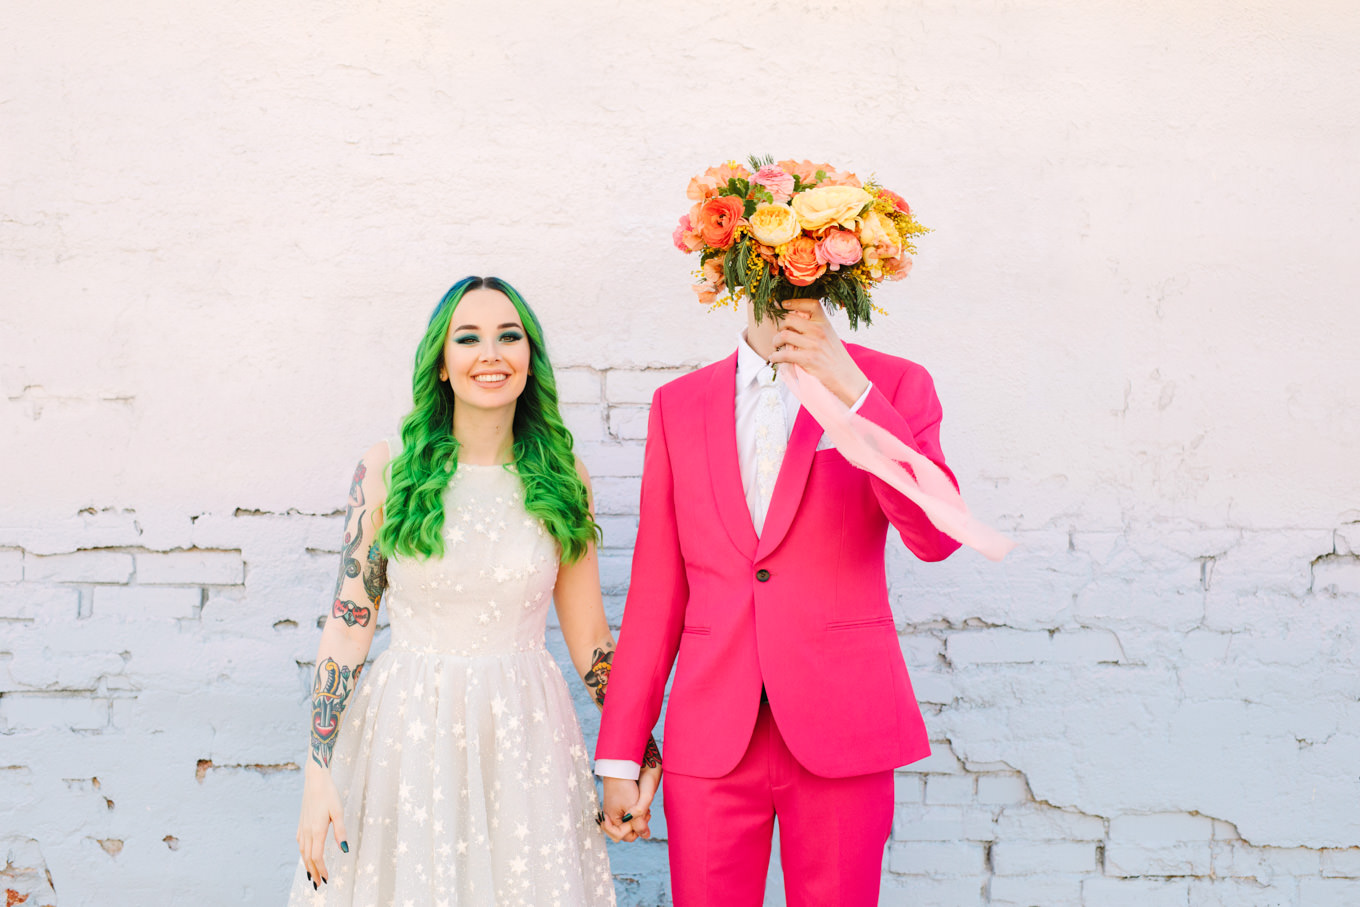 Bride with neon green hair and groom in hot pink suit | Colorful wedding at The Unique Space Los Angeles published in The Knot Magazine | Fresh and colorful photography for fun-loving couples in Southern California | #colorfulwedding #losangeleswedding #weddingphotography #uniquespace Source: Mary Costa Photography | Los Angeles